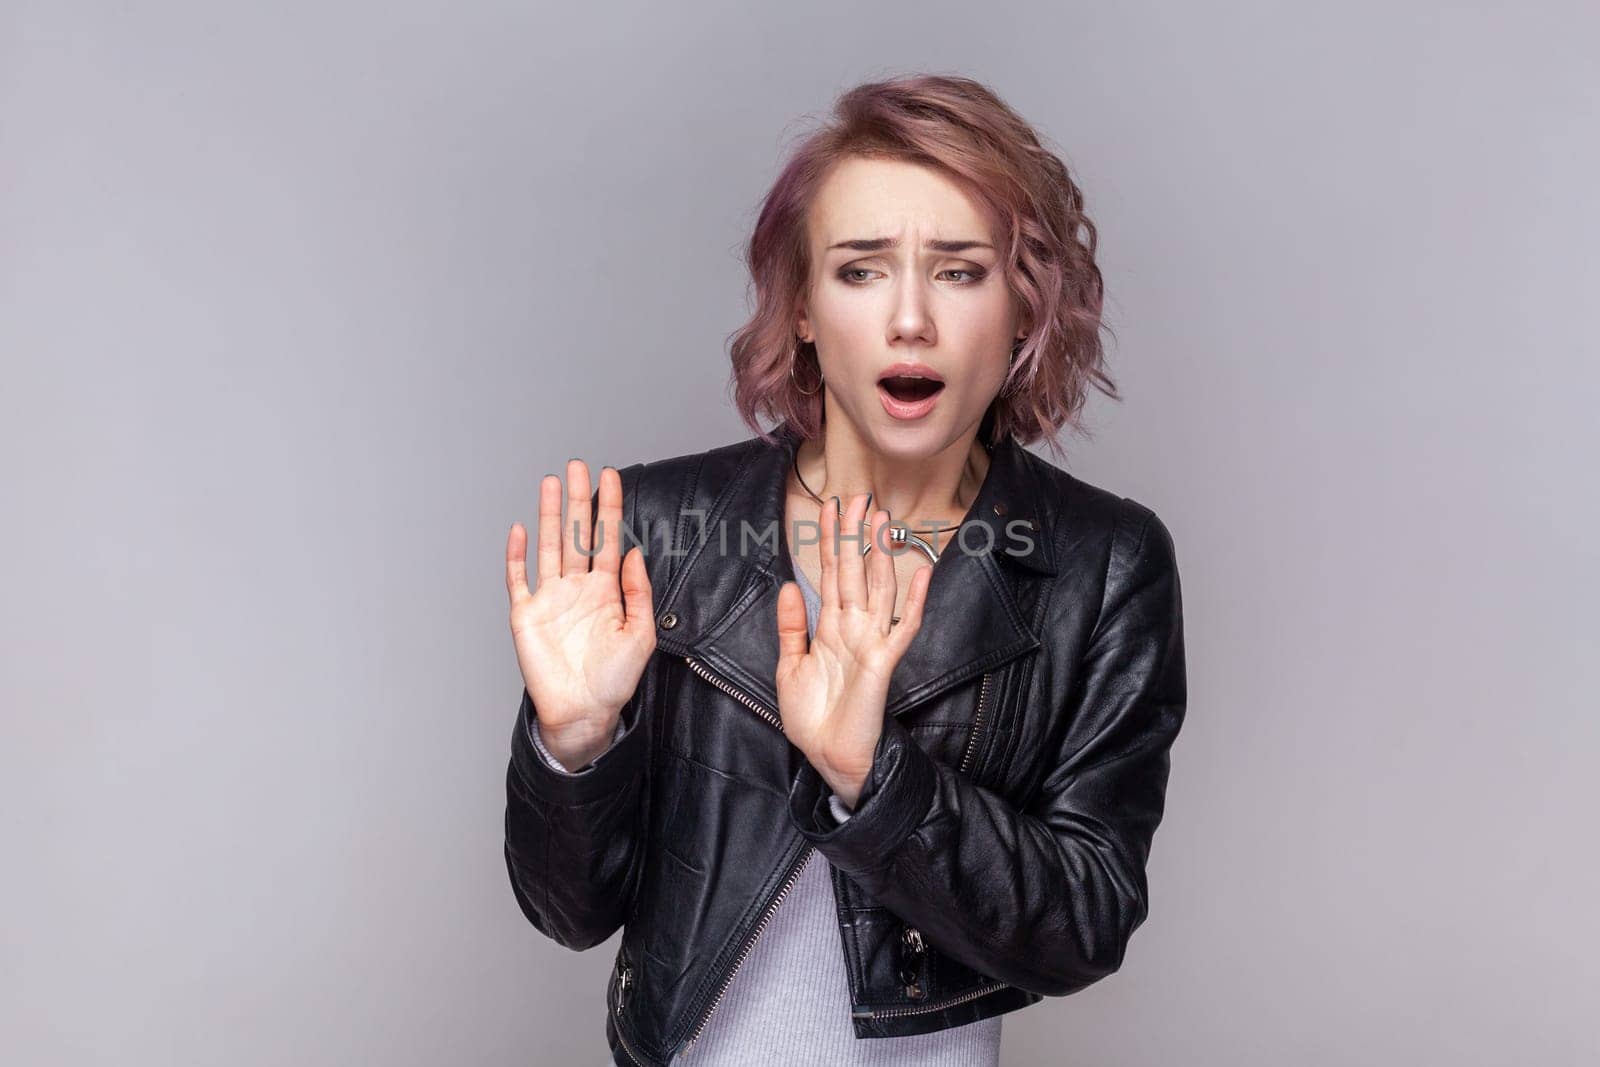 Portrait of scared frighten shocked woman with short hairstyle standing with showing stop sign, asking to stop, wearing black leather jacket. Indoor studio shot isolated on grey background.